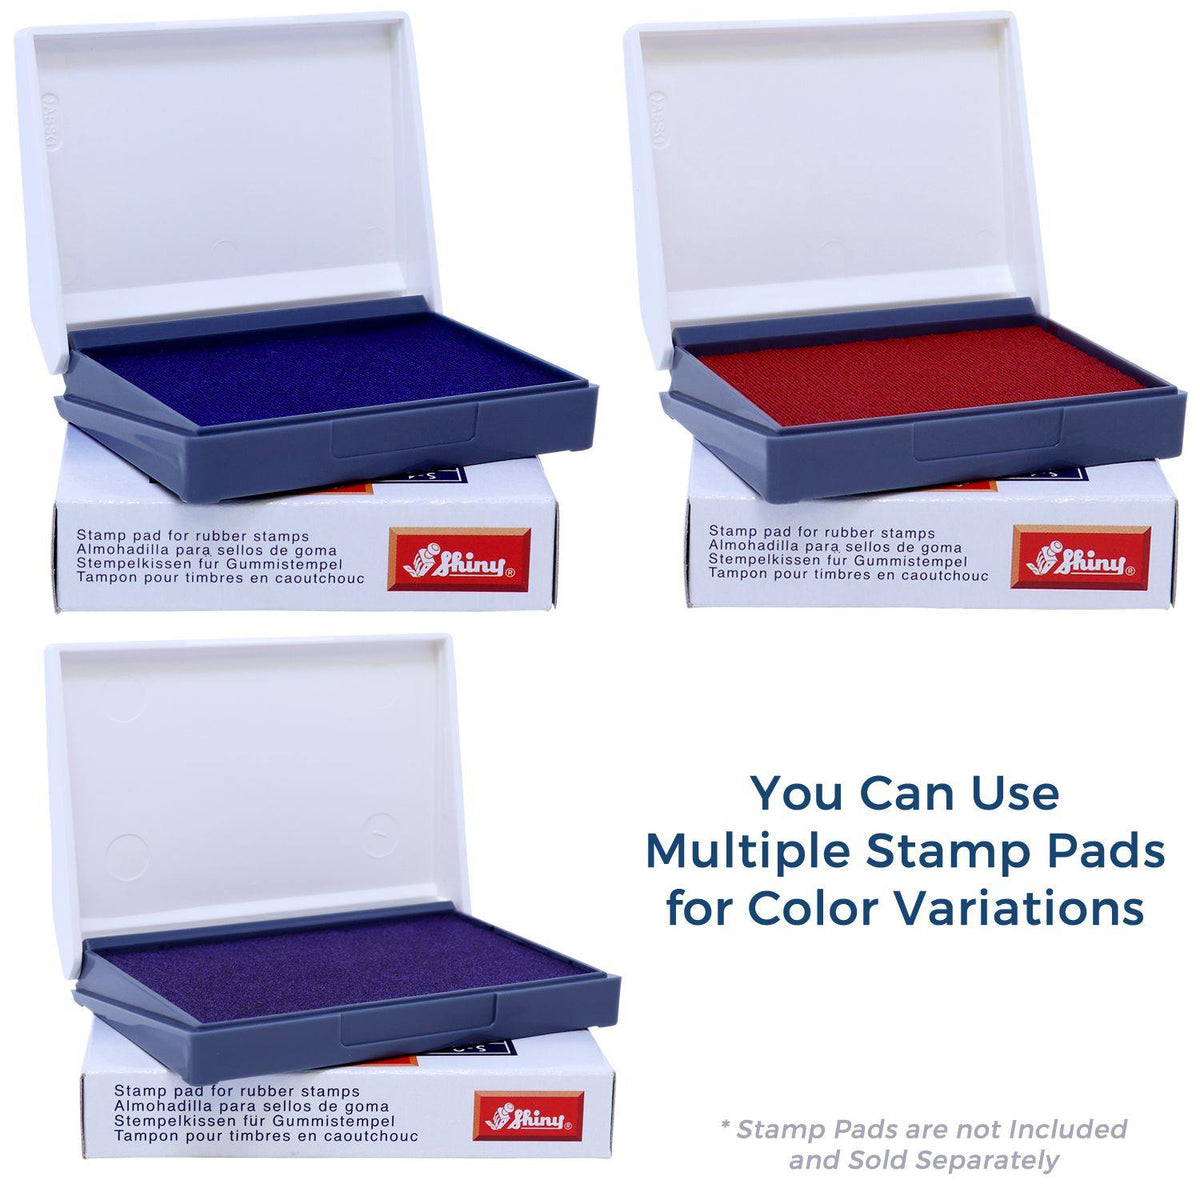 Stamp Pads for Large Confidential Rubber Stamp Available